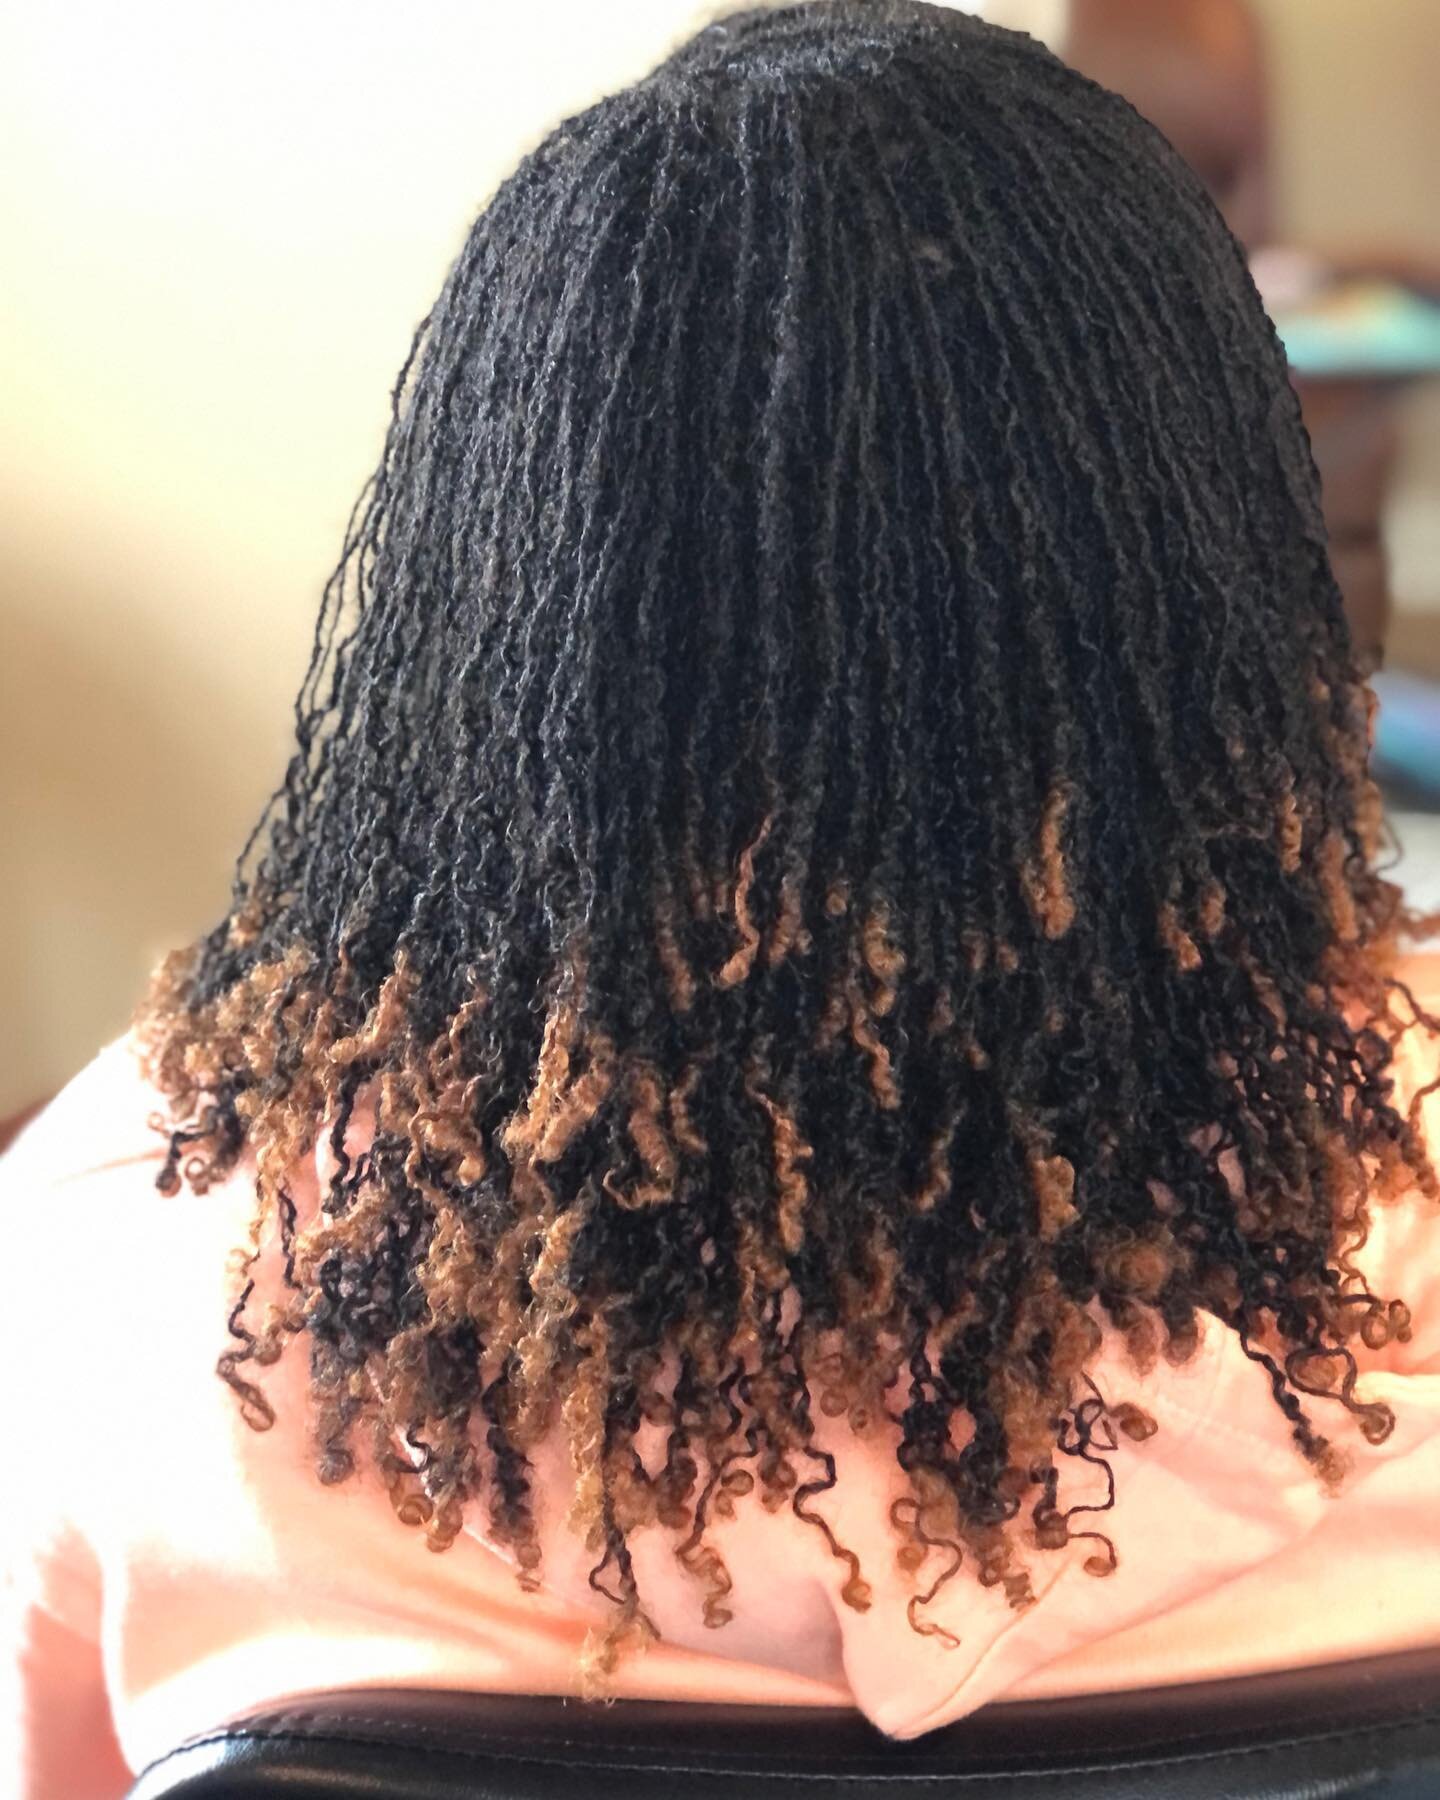 Here the redid part of the clients install. Her Sisterlocks where done too big in the front. I redid the top too sections for her. The first picture is about a year after her install fix. #sisterlocks #sisterlocksinstallation #sisterlocksinphoenix #s